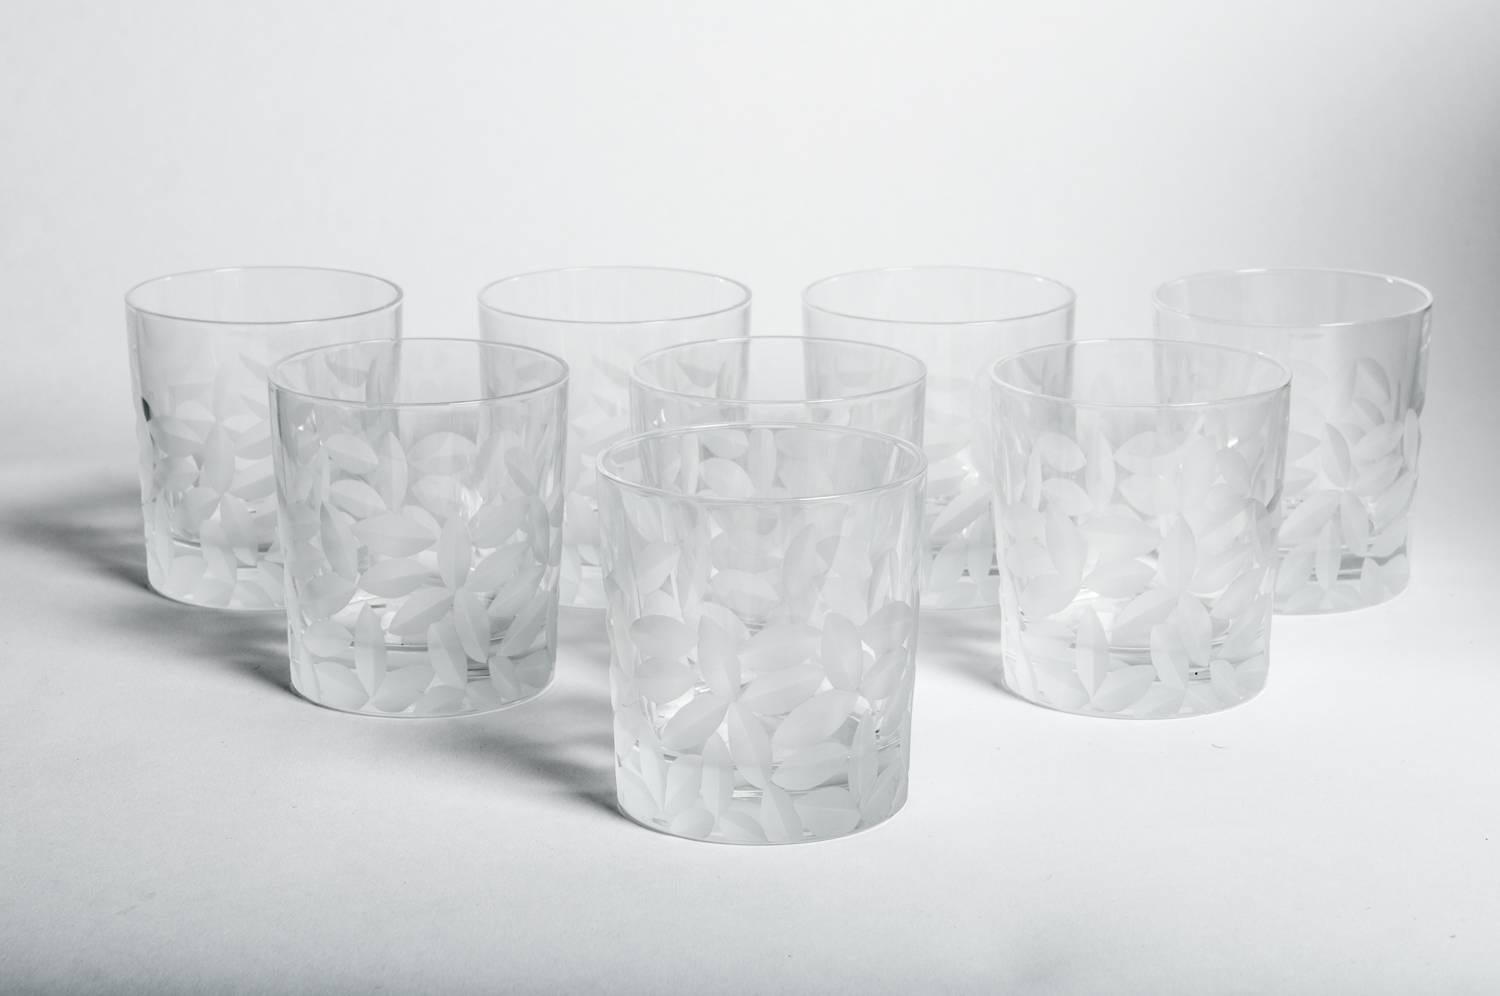 Mid-20th century cut crystal Tiffany low ball drinks glassware set of Six , in the Clover pattern. Excellent condition. Each low ball glass measure 3.75 high x 3.5 inches top diameter.